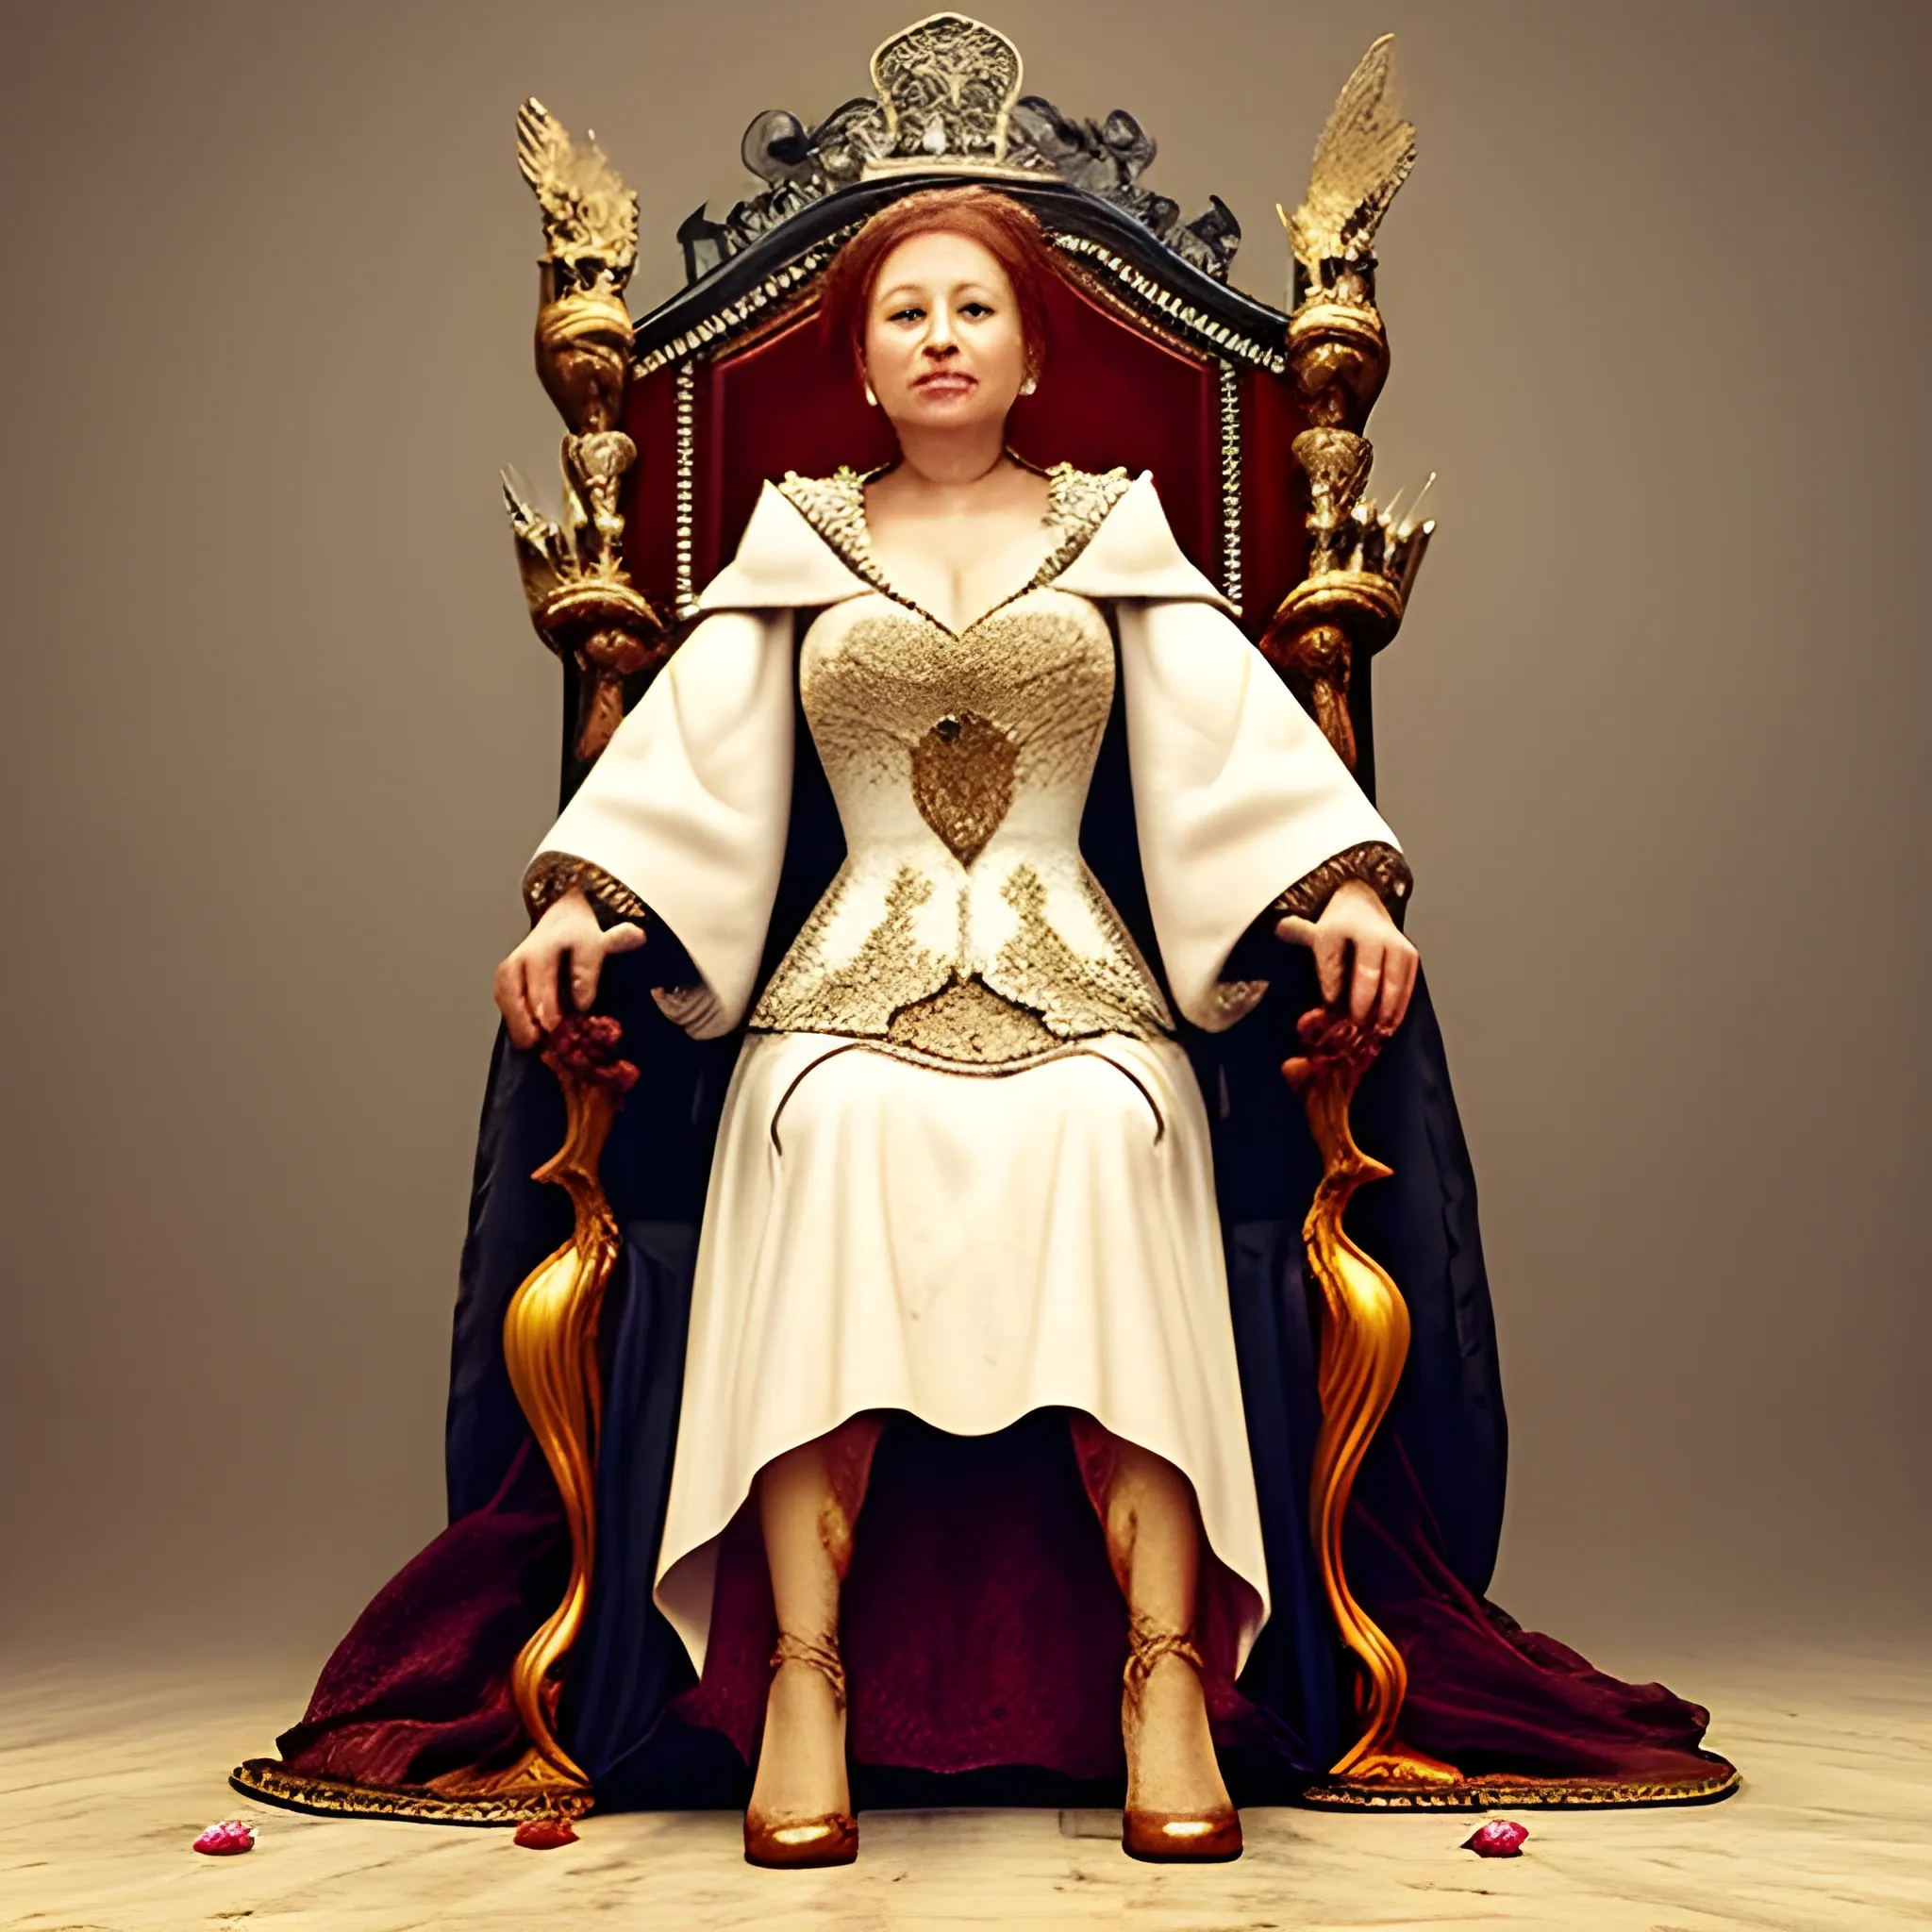 Woman on throne